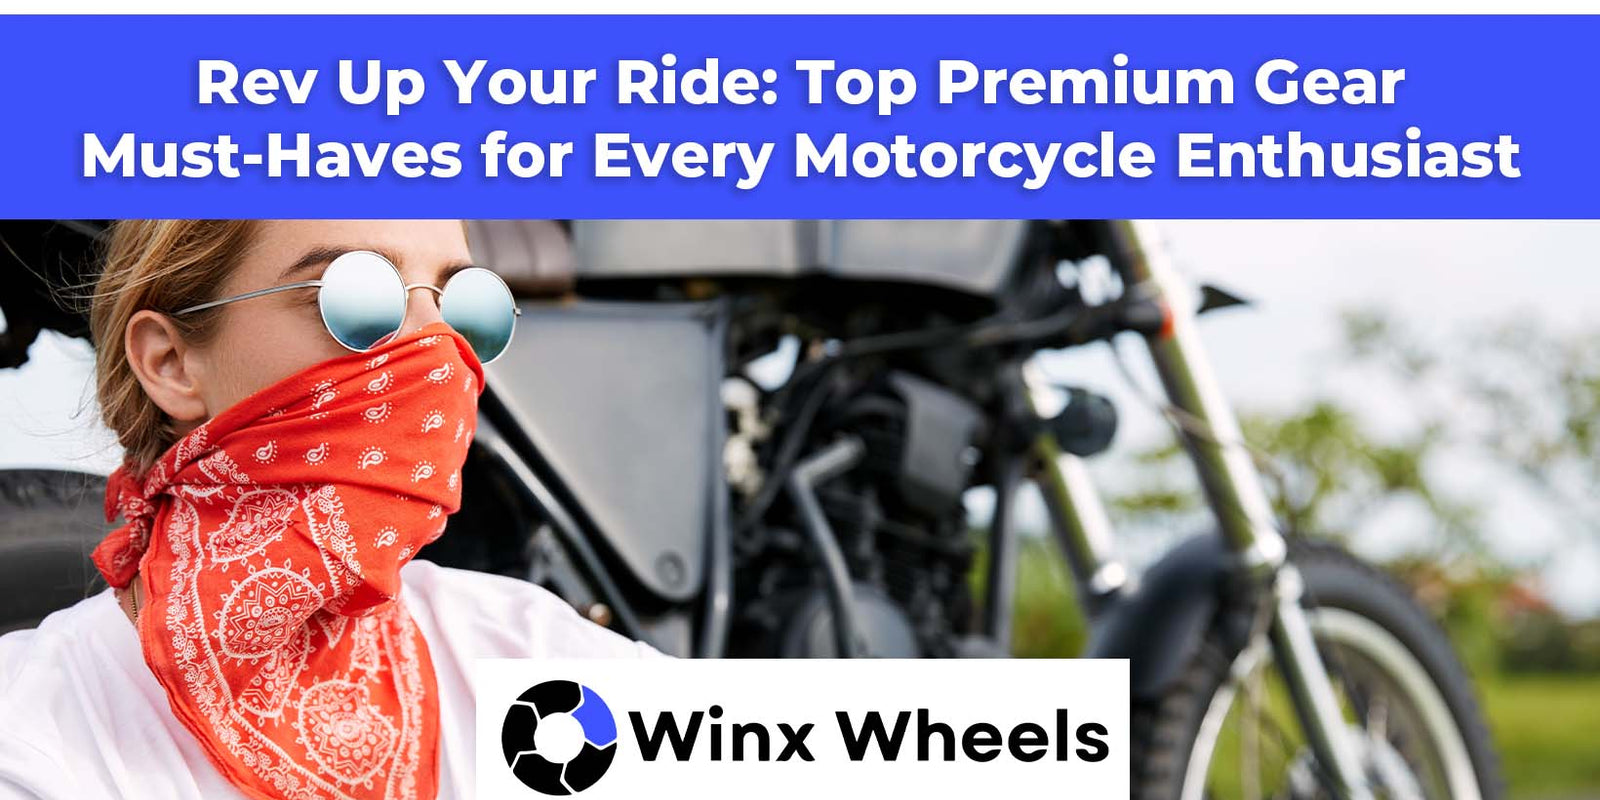 Rev Up Your Ride: Top Premium Gear Must-Haves for Every Motorcycle Enthusiast